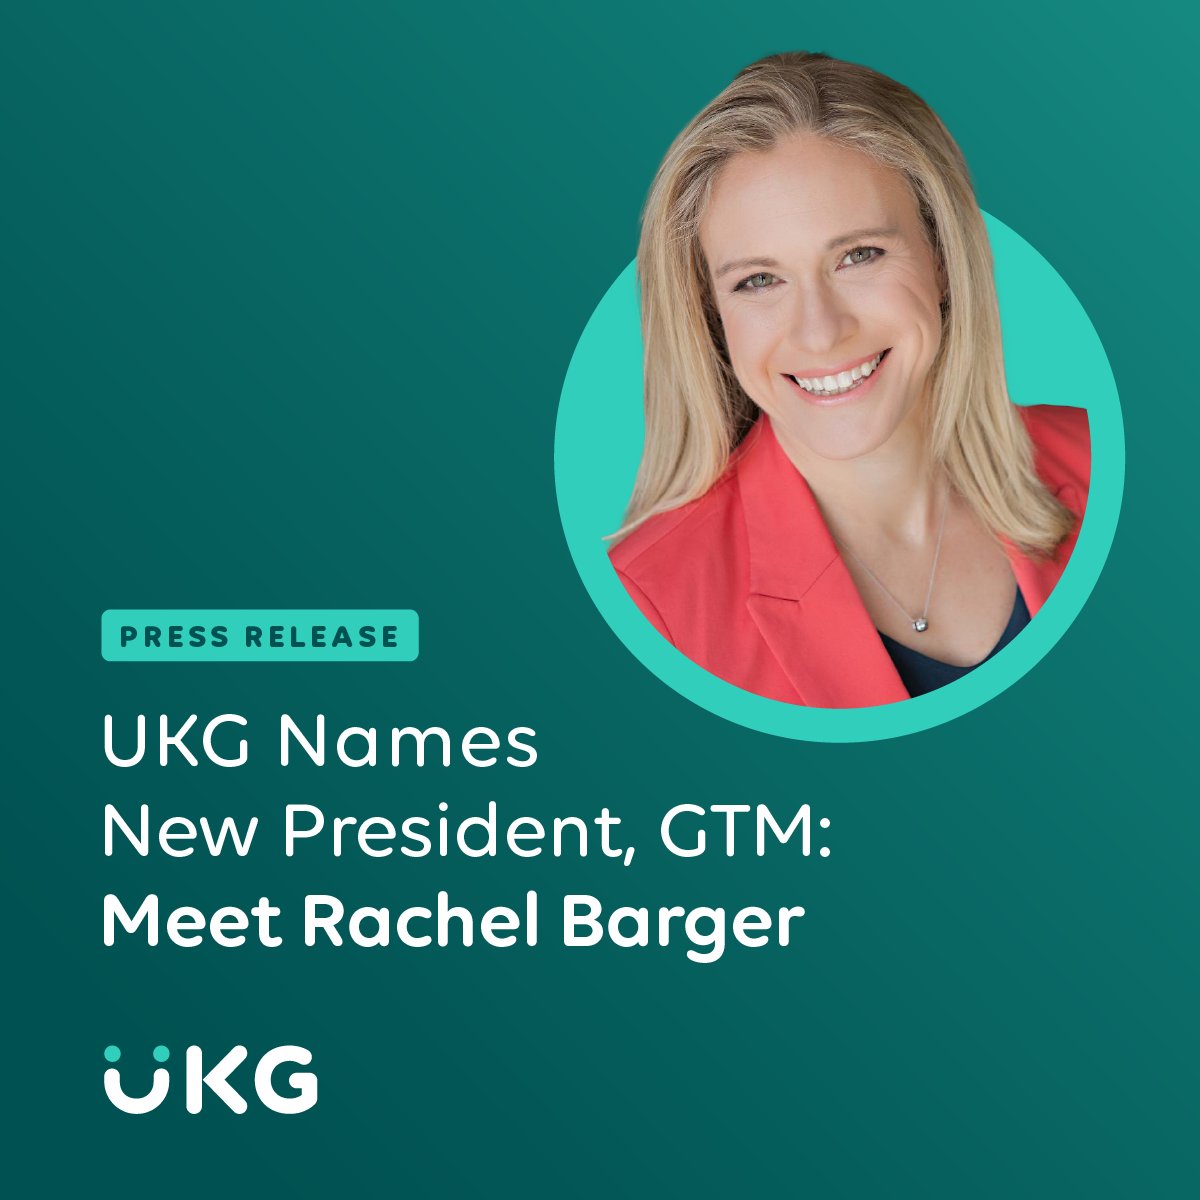 We are excited to announce Rachel Barger as the new President, GTM of UKG. With over 20 years of experience leading teams globally at Cisco, she will oversee sales, marketing, and customer relationships at UKG. ukg.inc/4d21bsz #WeAreUKG